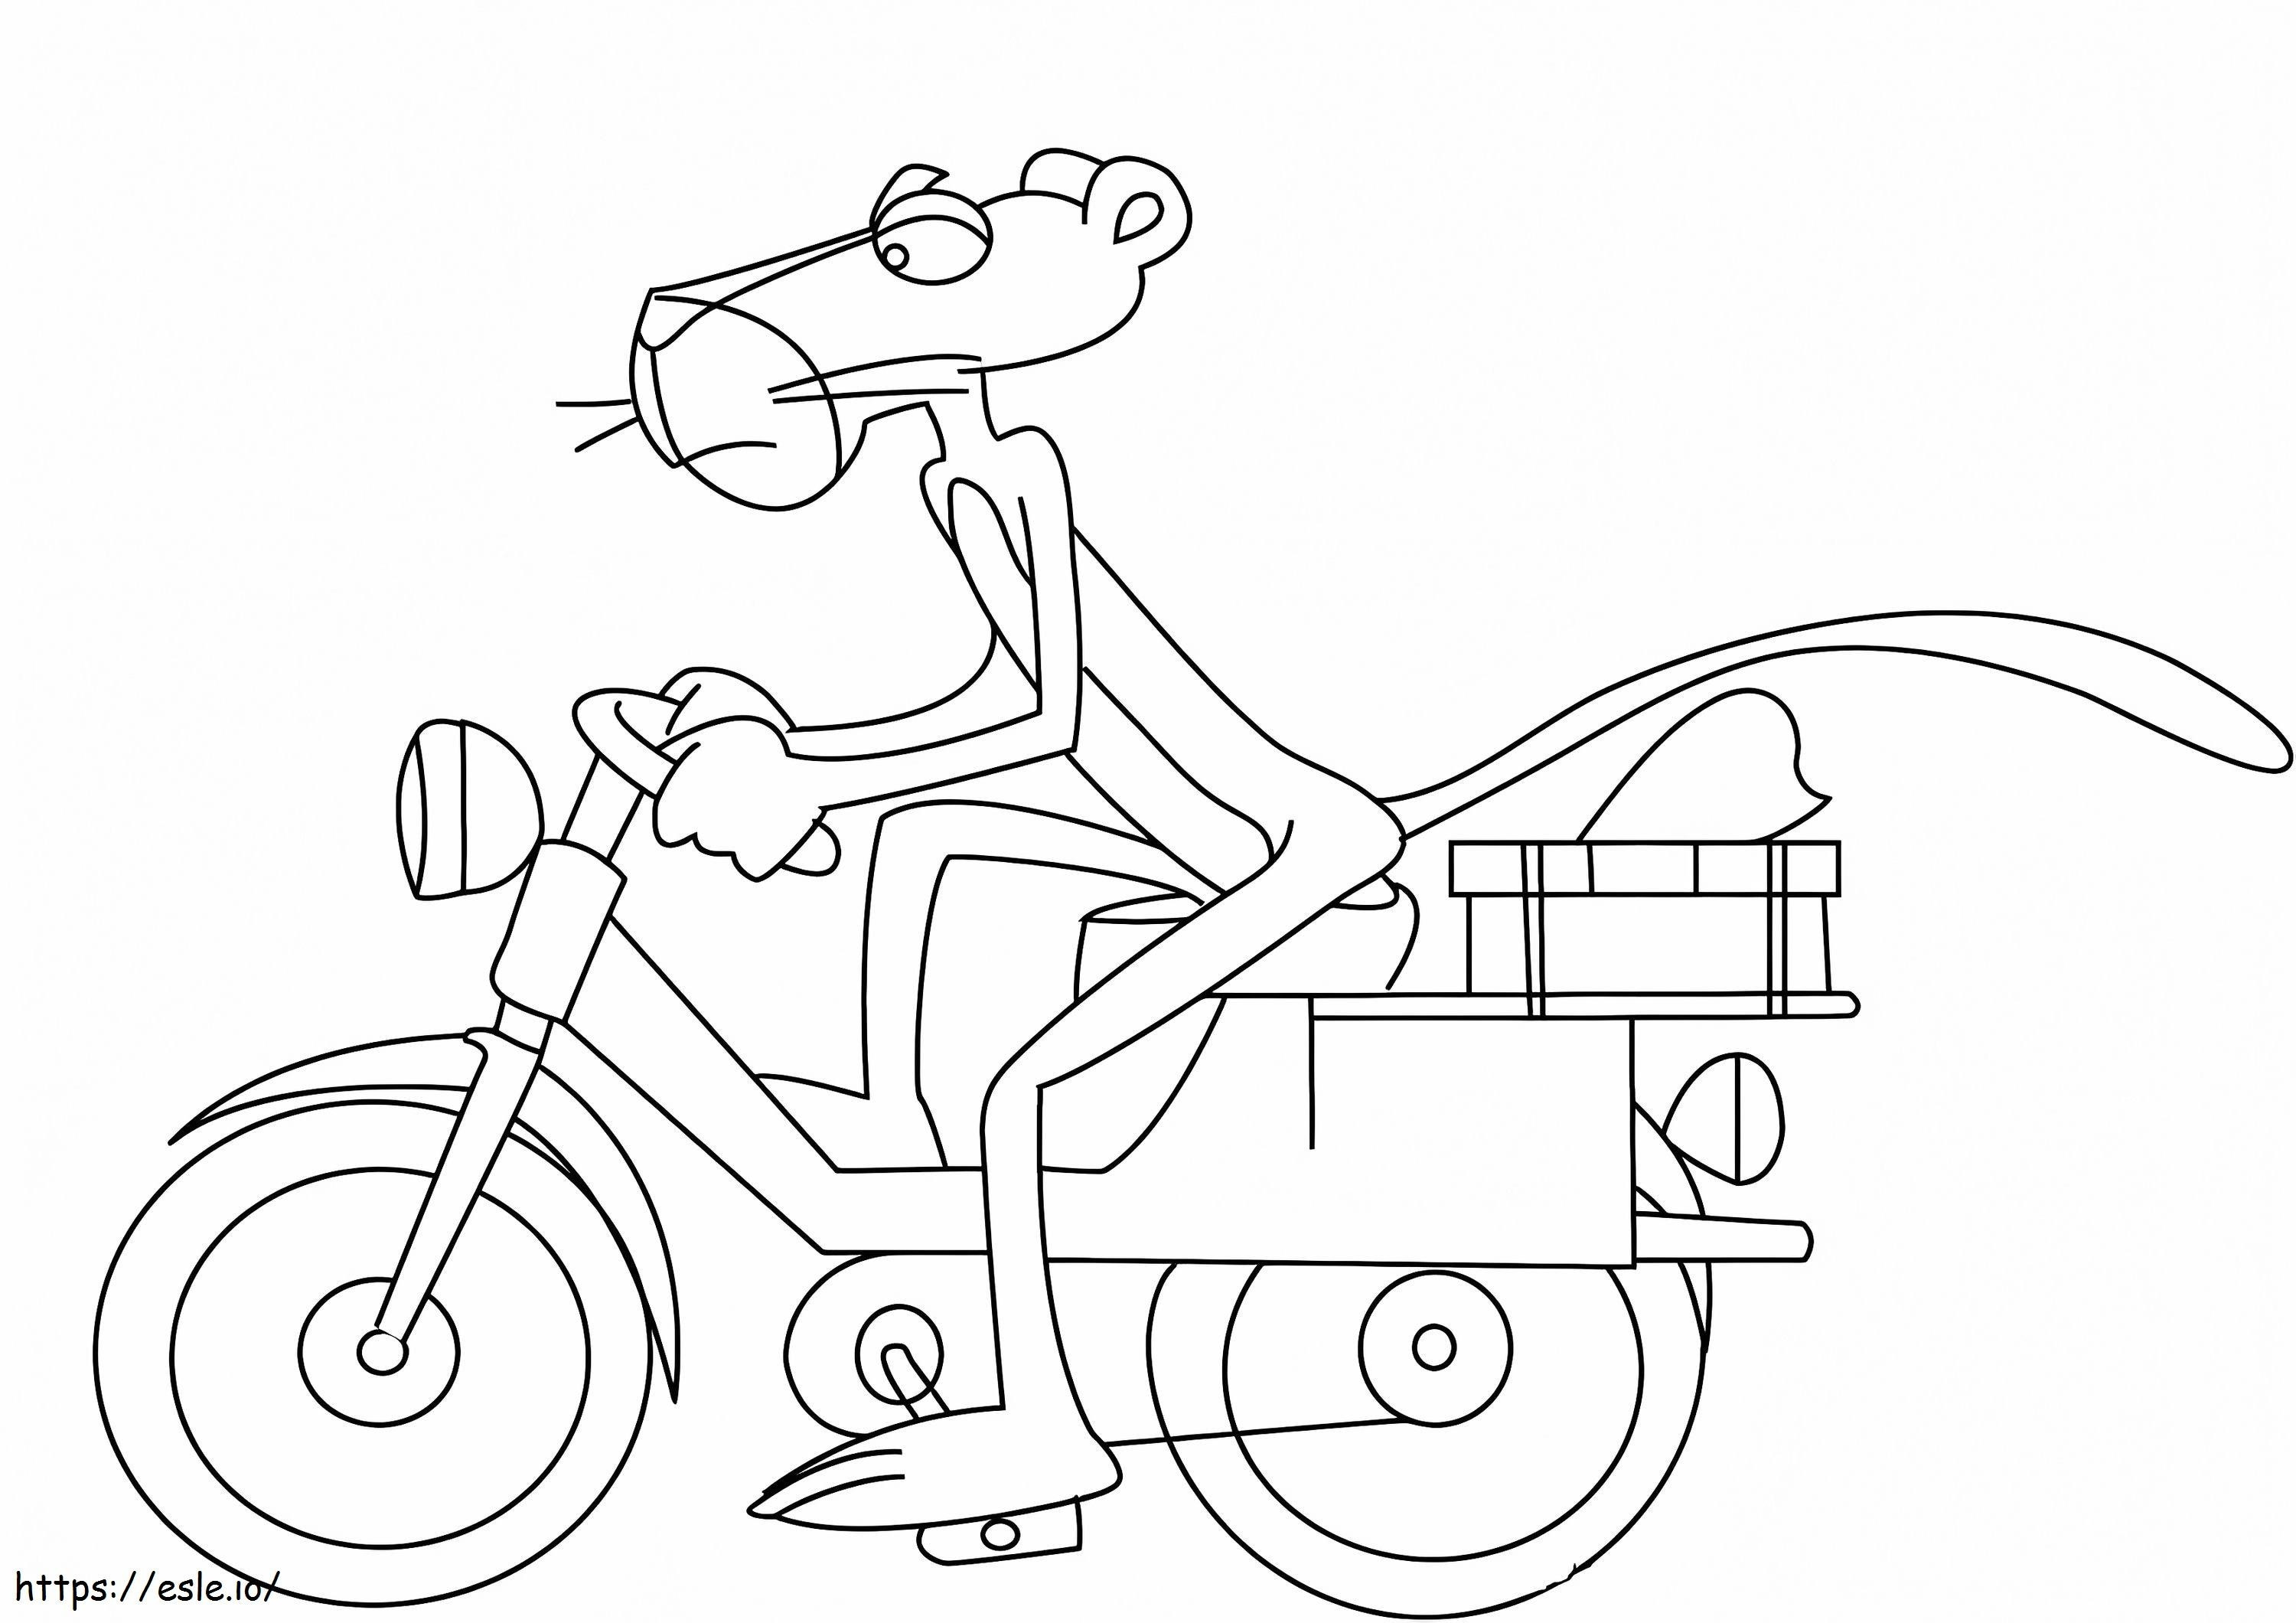 Pink Panther Ride The Motorcycle coloring page